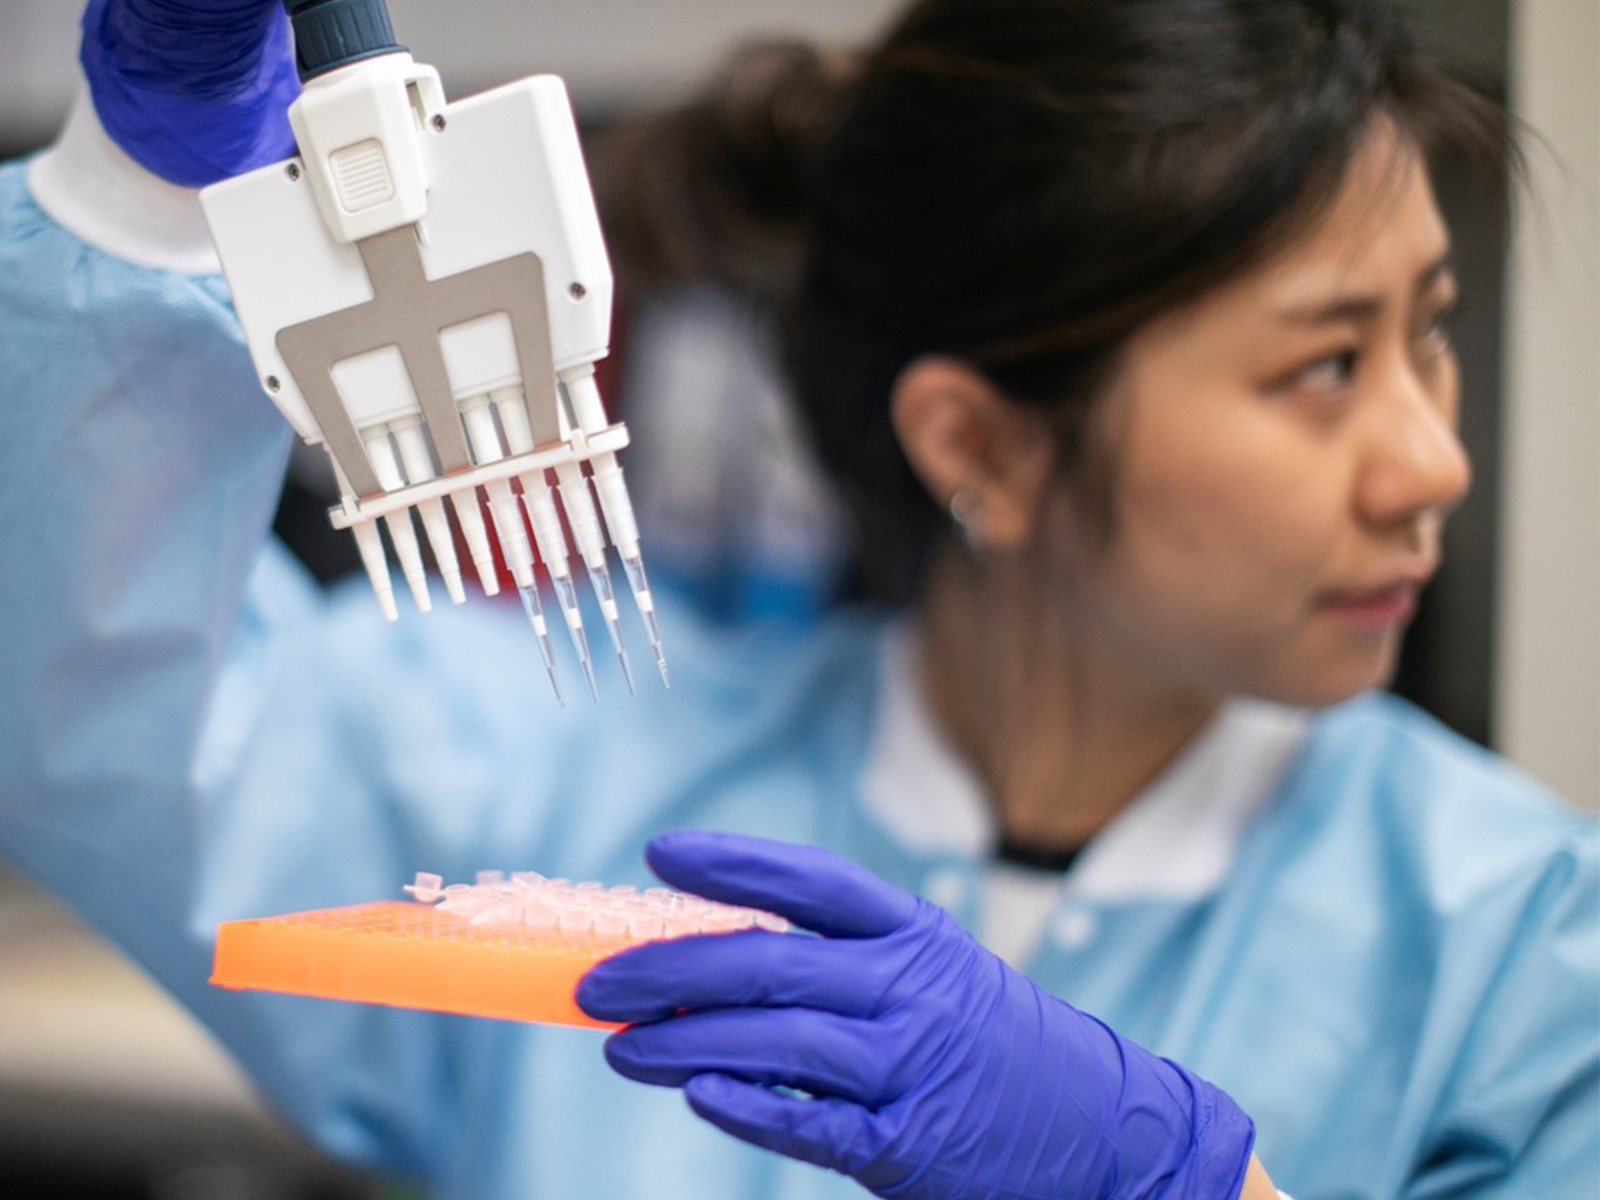 A female scientist using a multichannel pipette in a lab setting